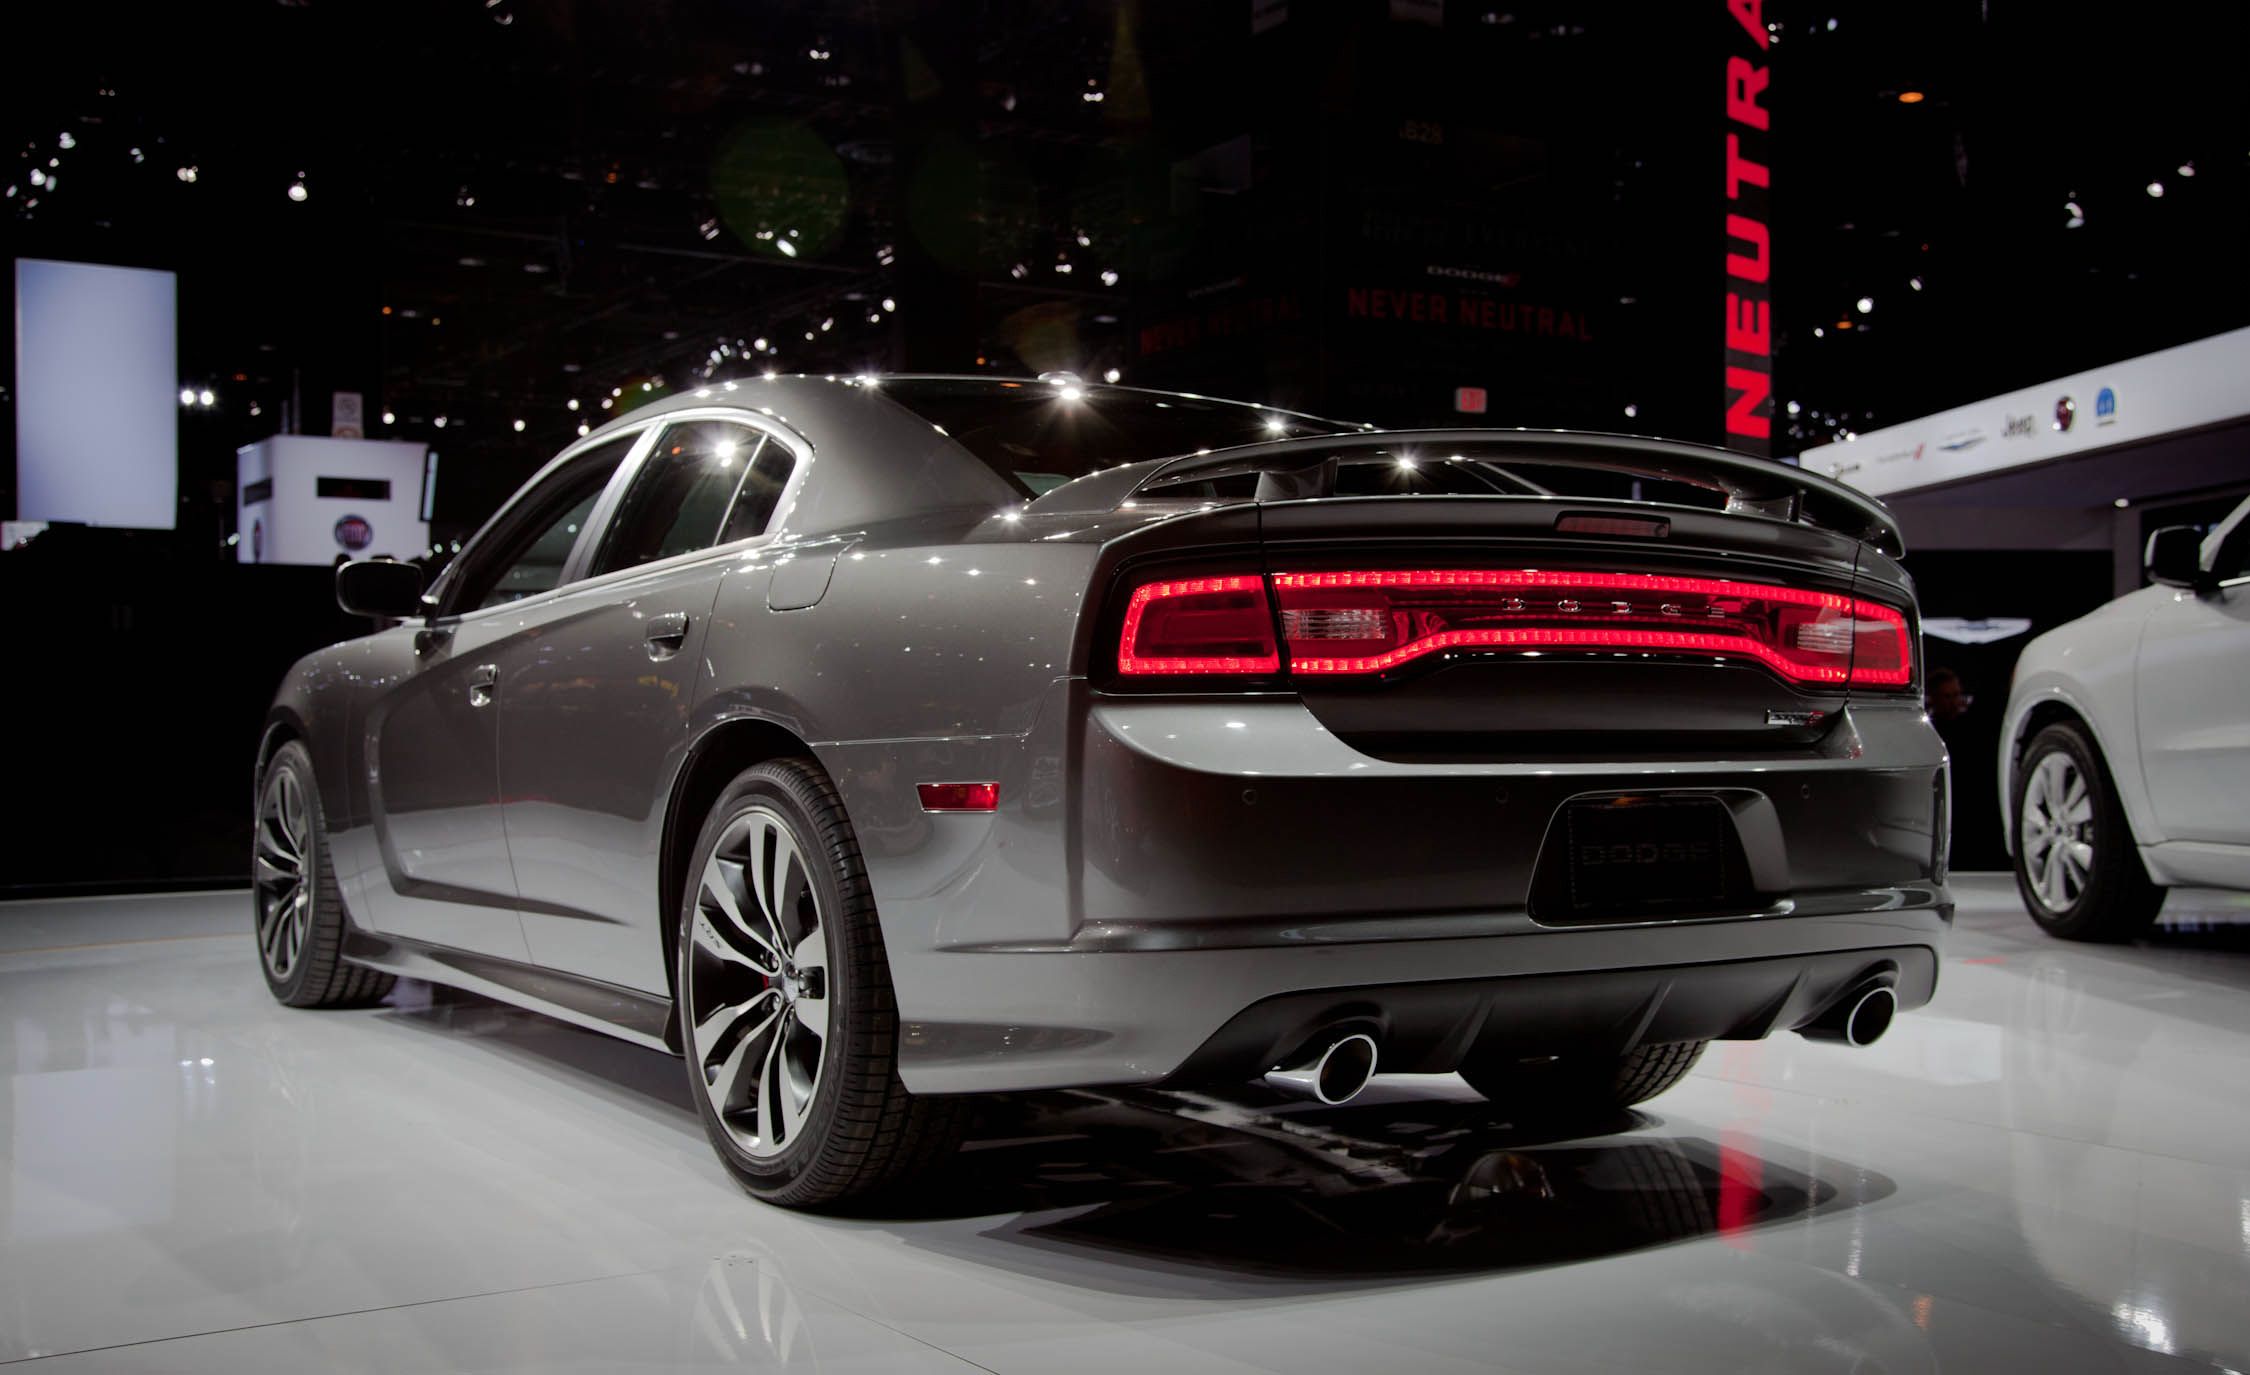 2012 Dodge Charger SRT8 Photos and Info: Dodge Charger News – Car and  Driver